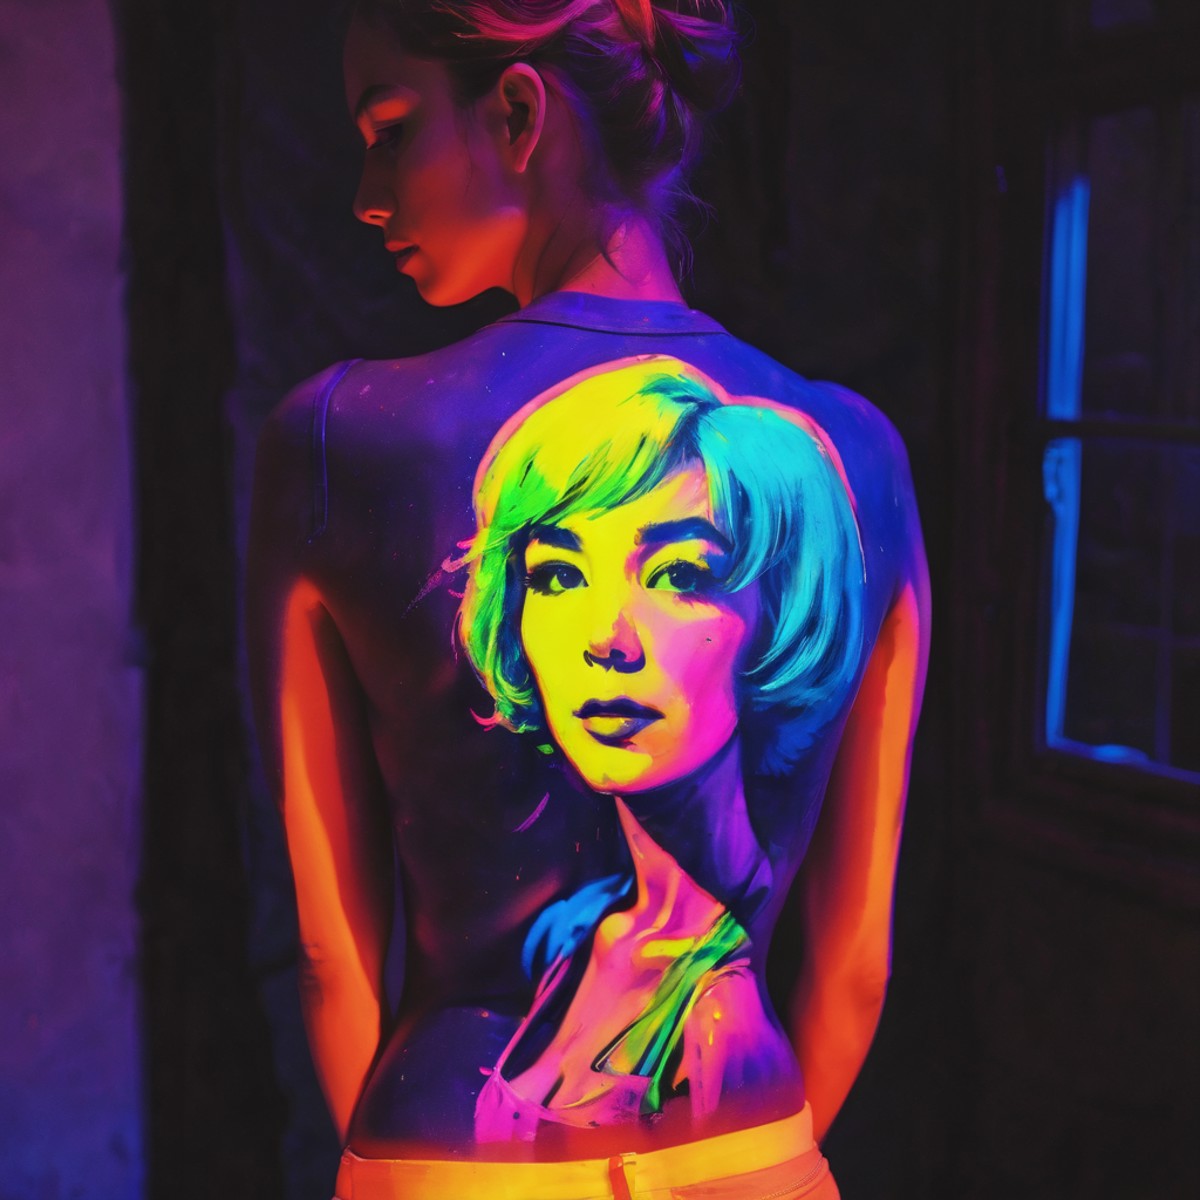 blacklight uv painted on the back of a girl depicting andy warhol art